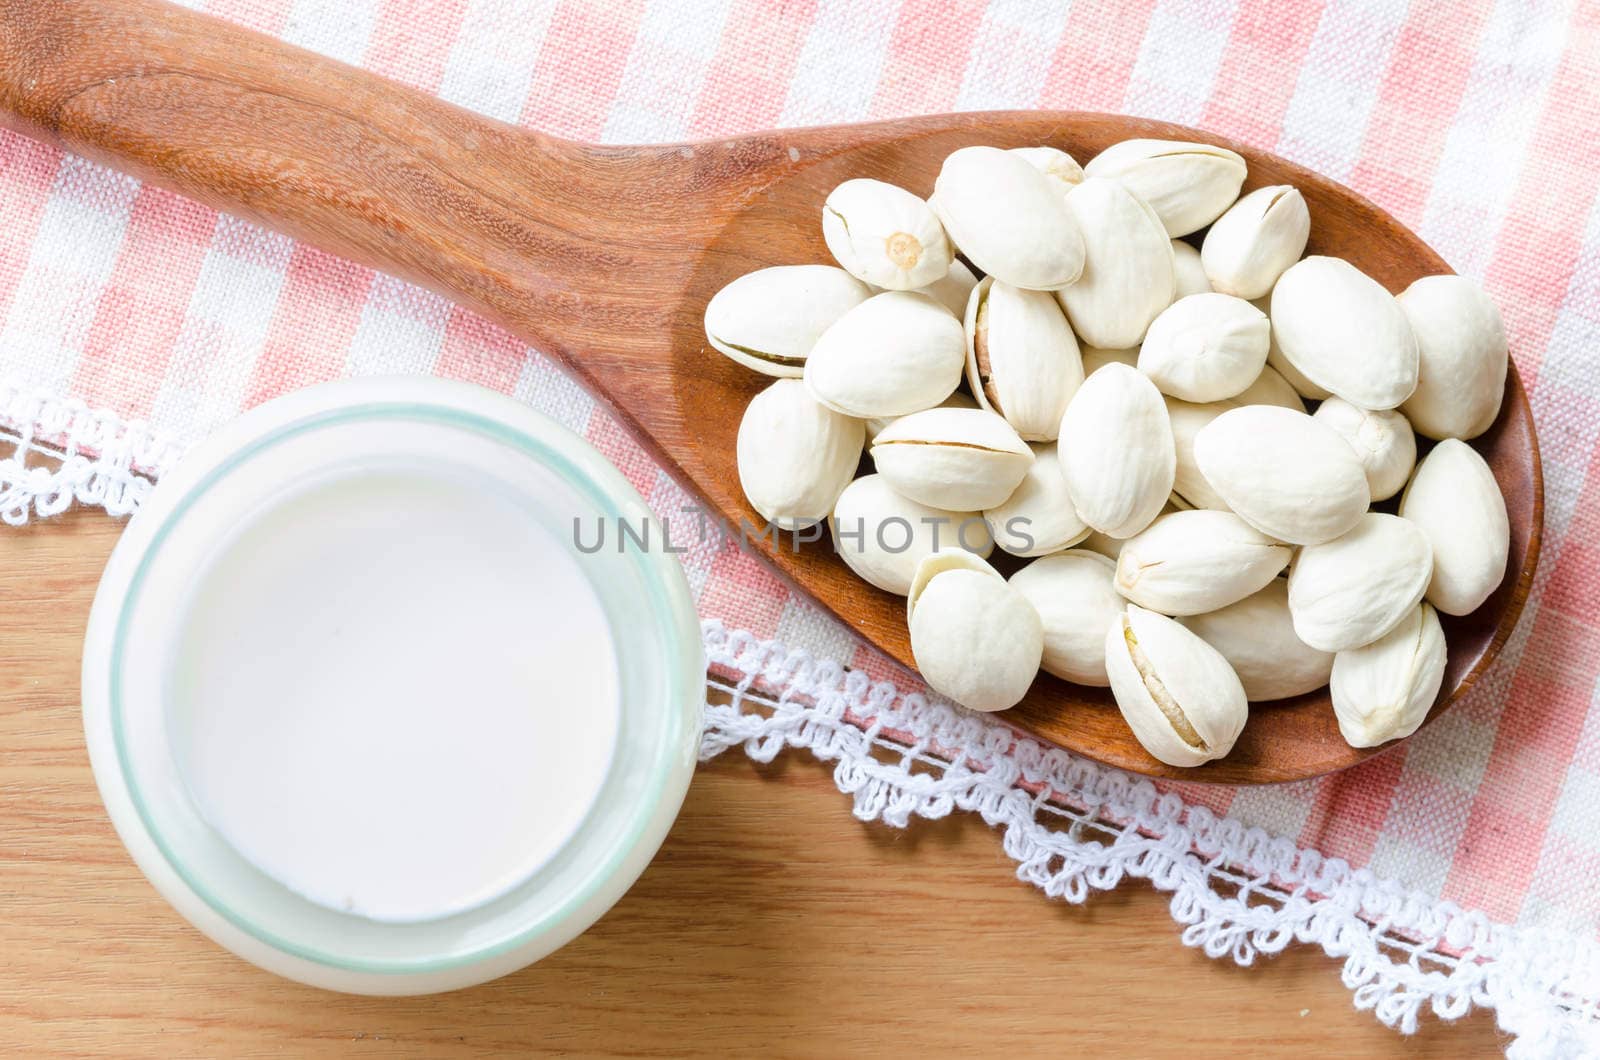 Pistachio in wooden spoon with milk in glass on tablecloth background.